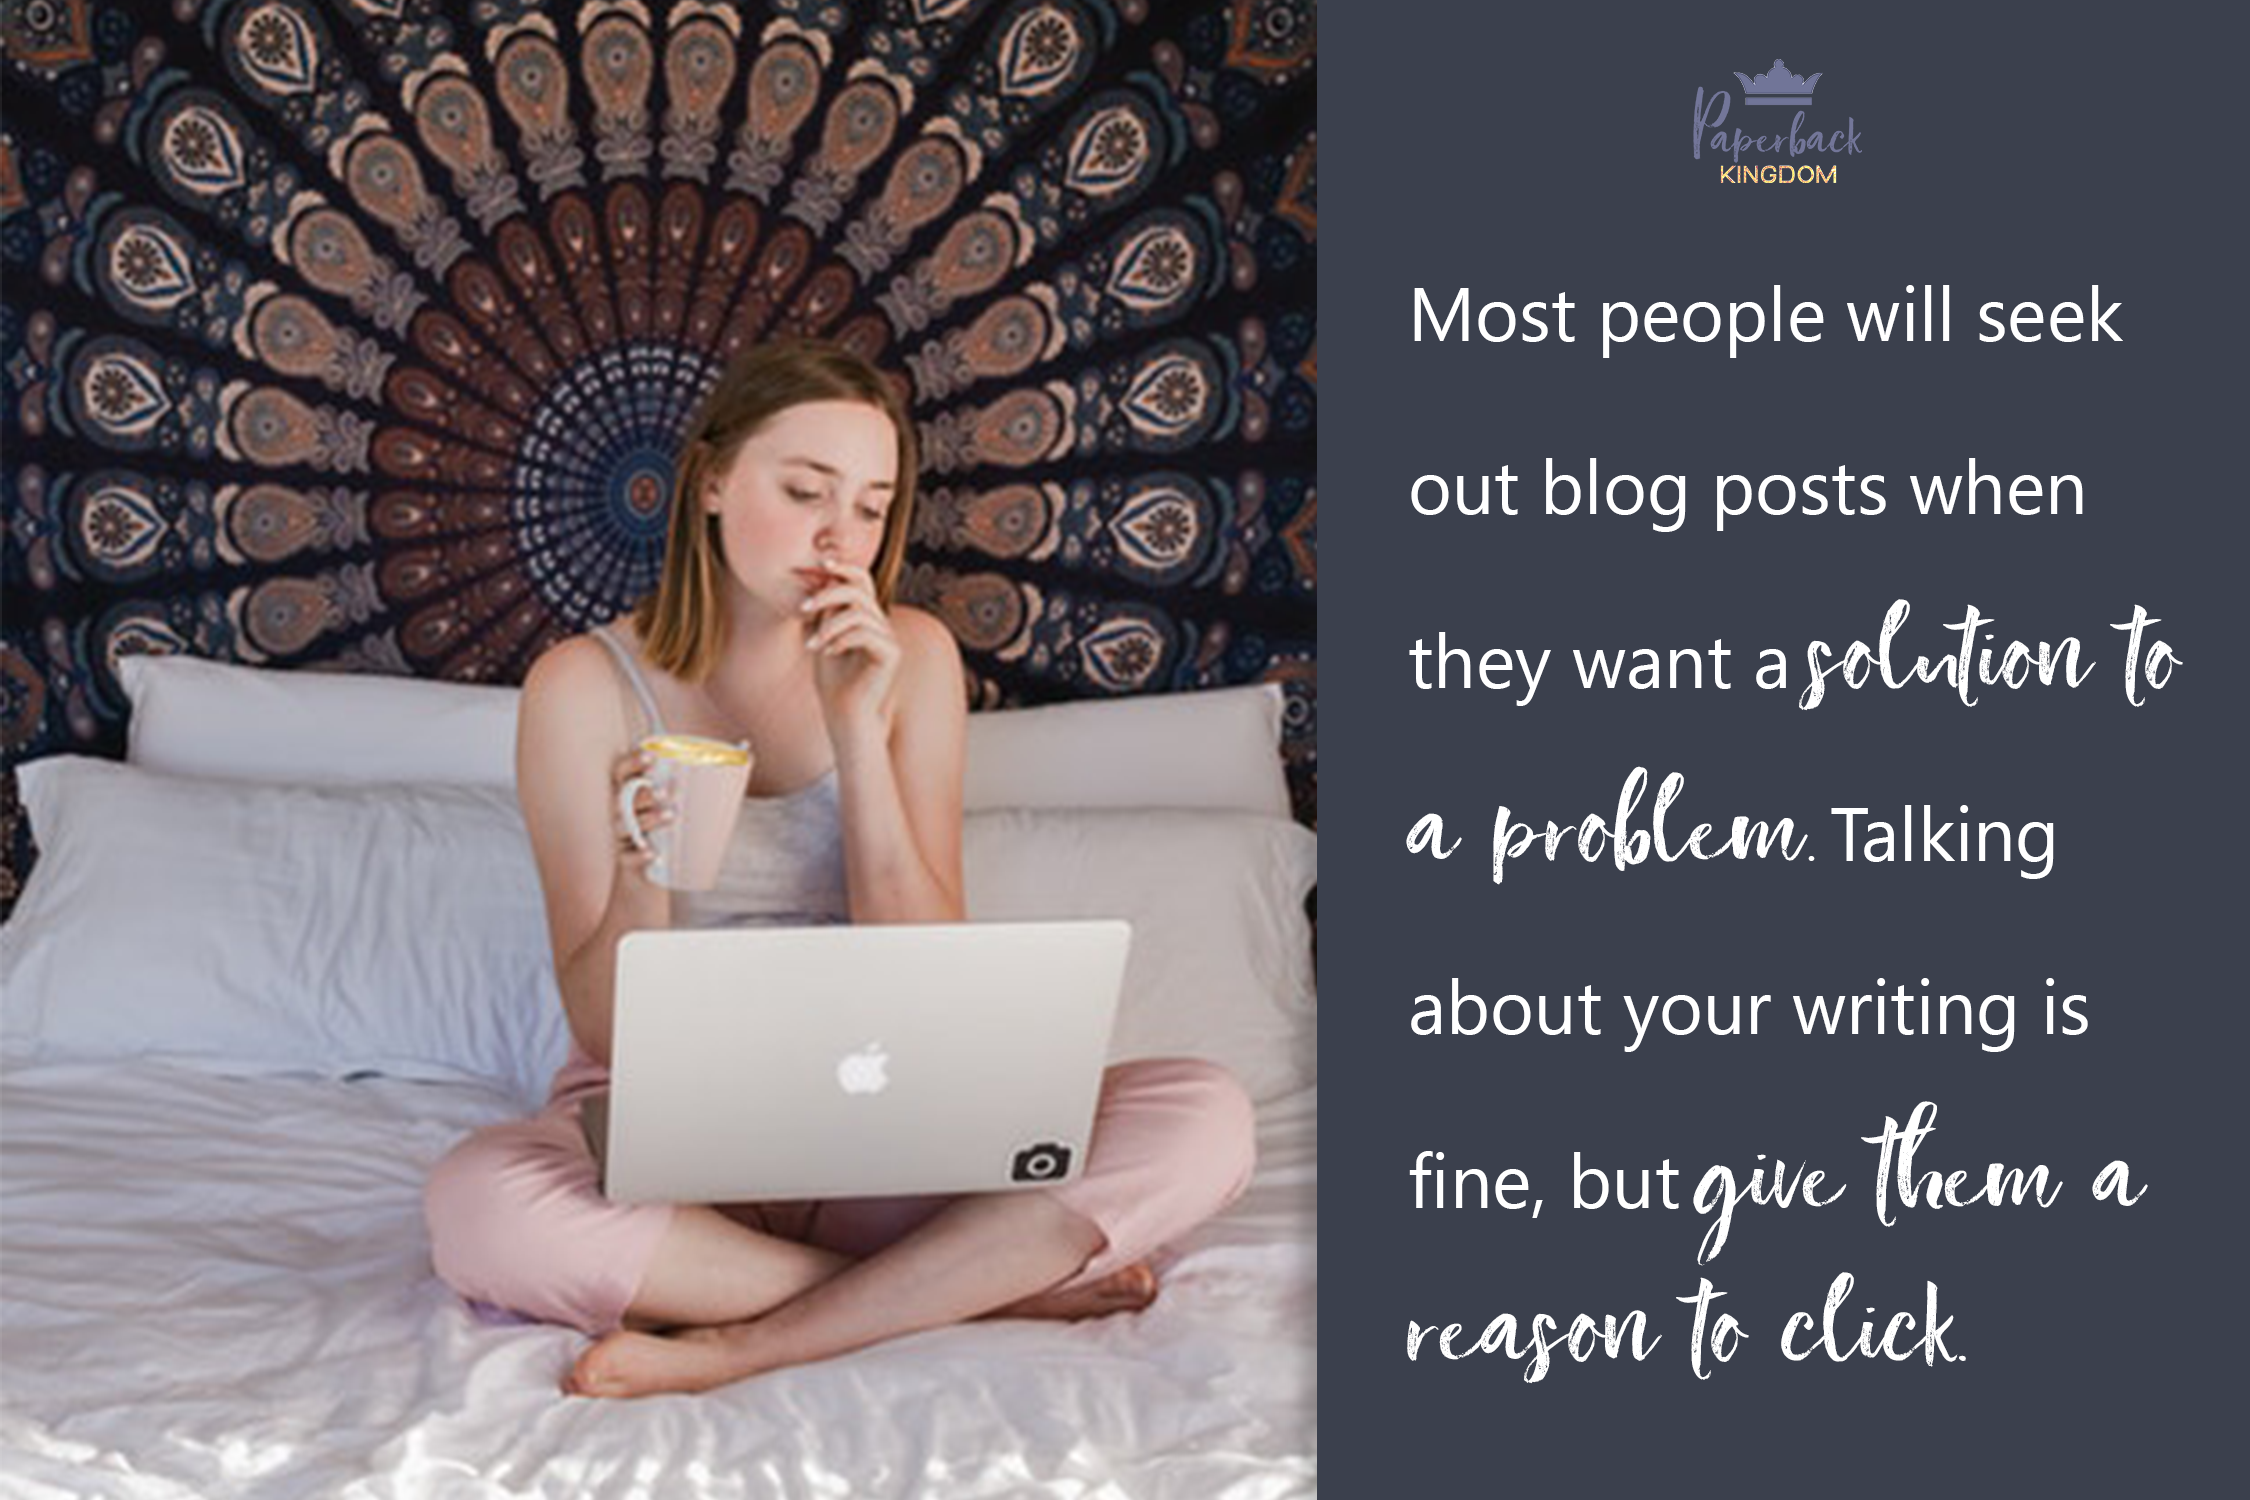 Most people will seek out blog posts when they want a solution to a problem. Talking about your writing is fine, but give them a reason to click.